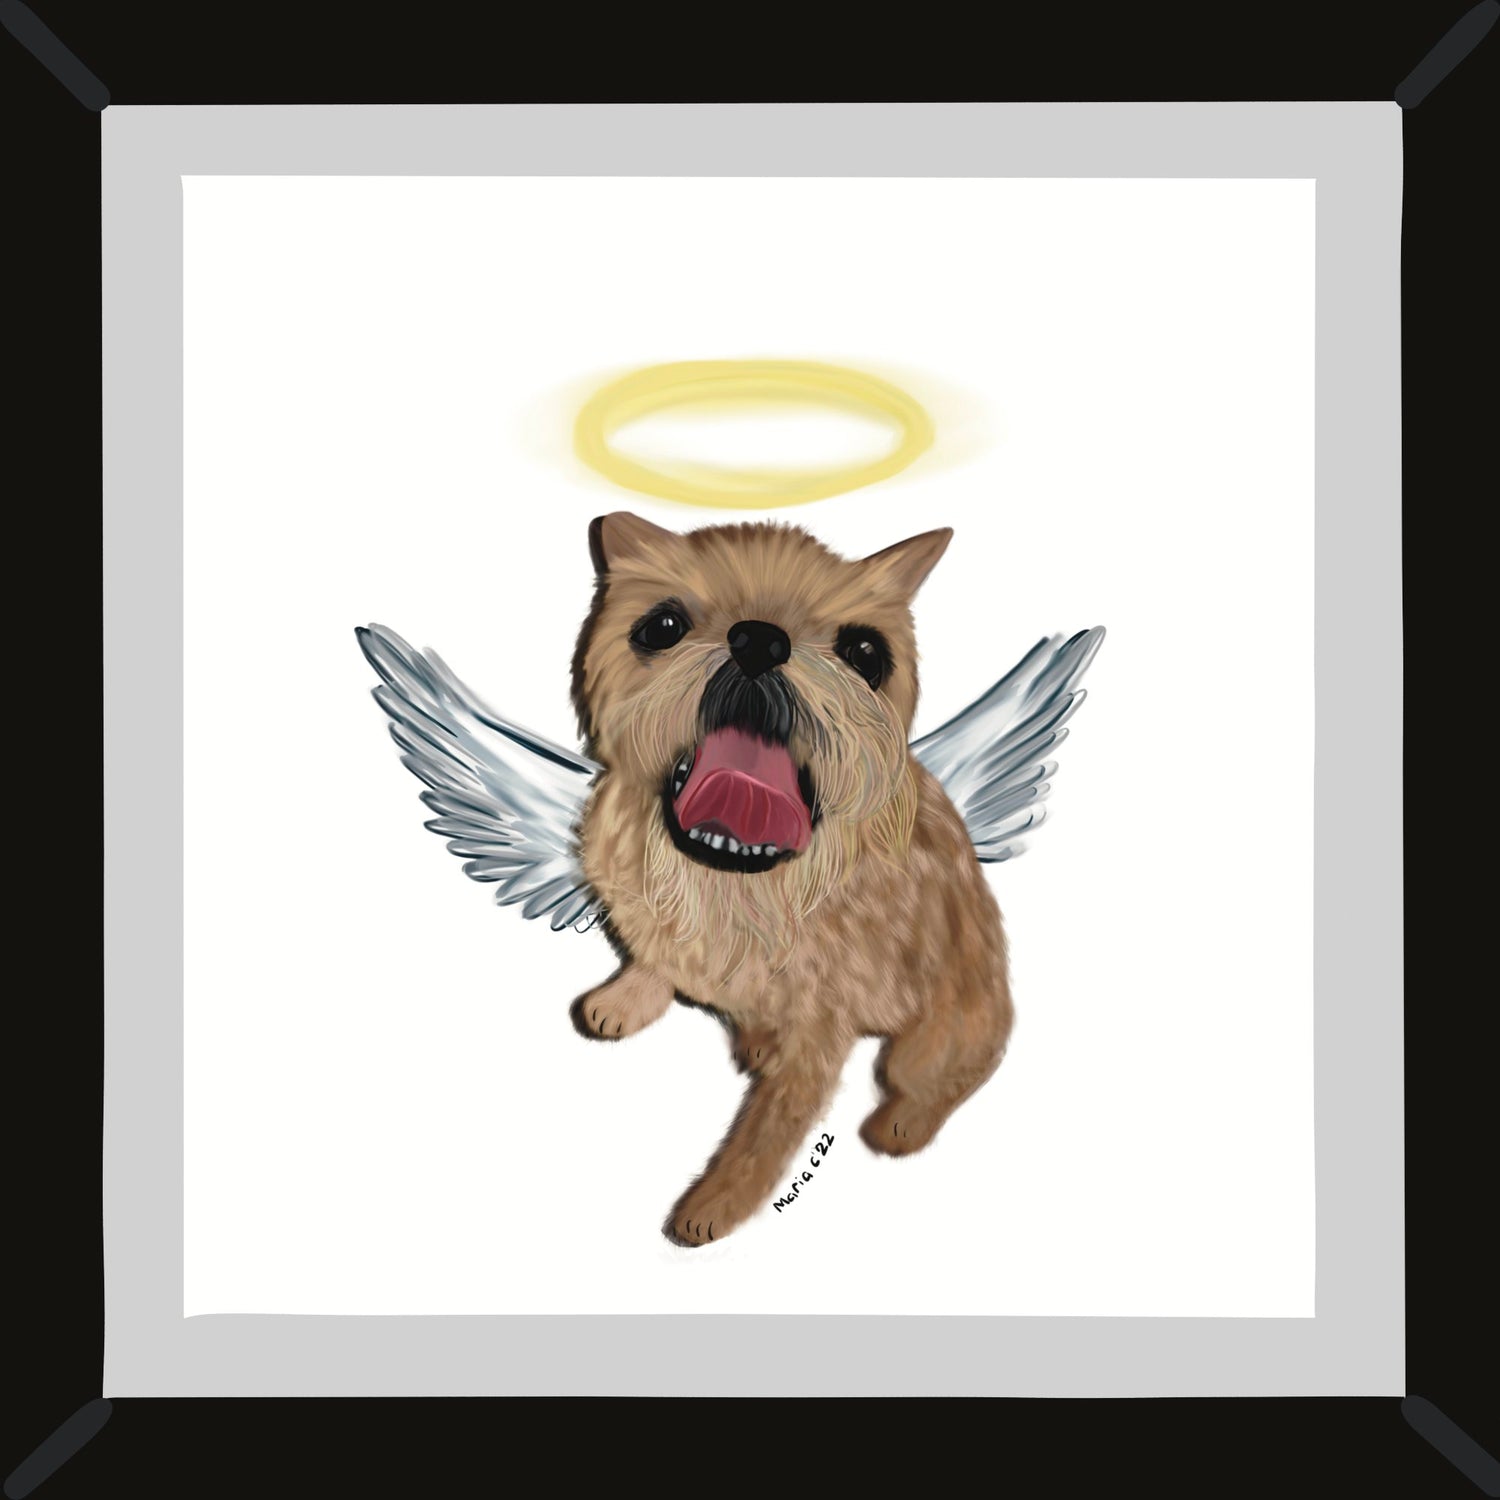 Brussels griffon wirehaired Pet Portrait with winds and a halo. Memorial Portrait of your pet